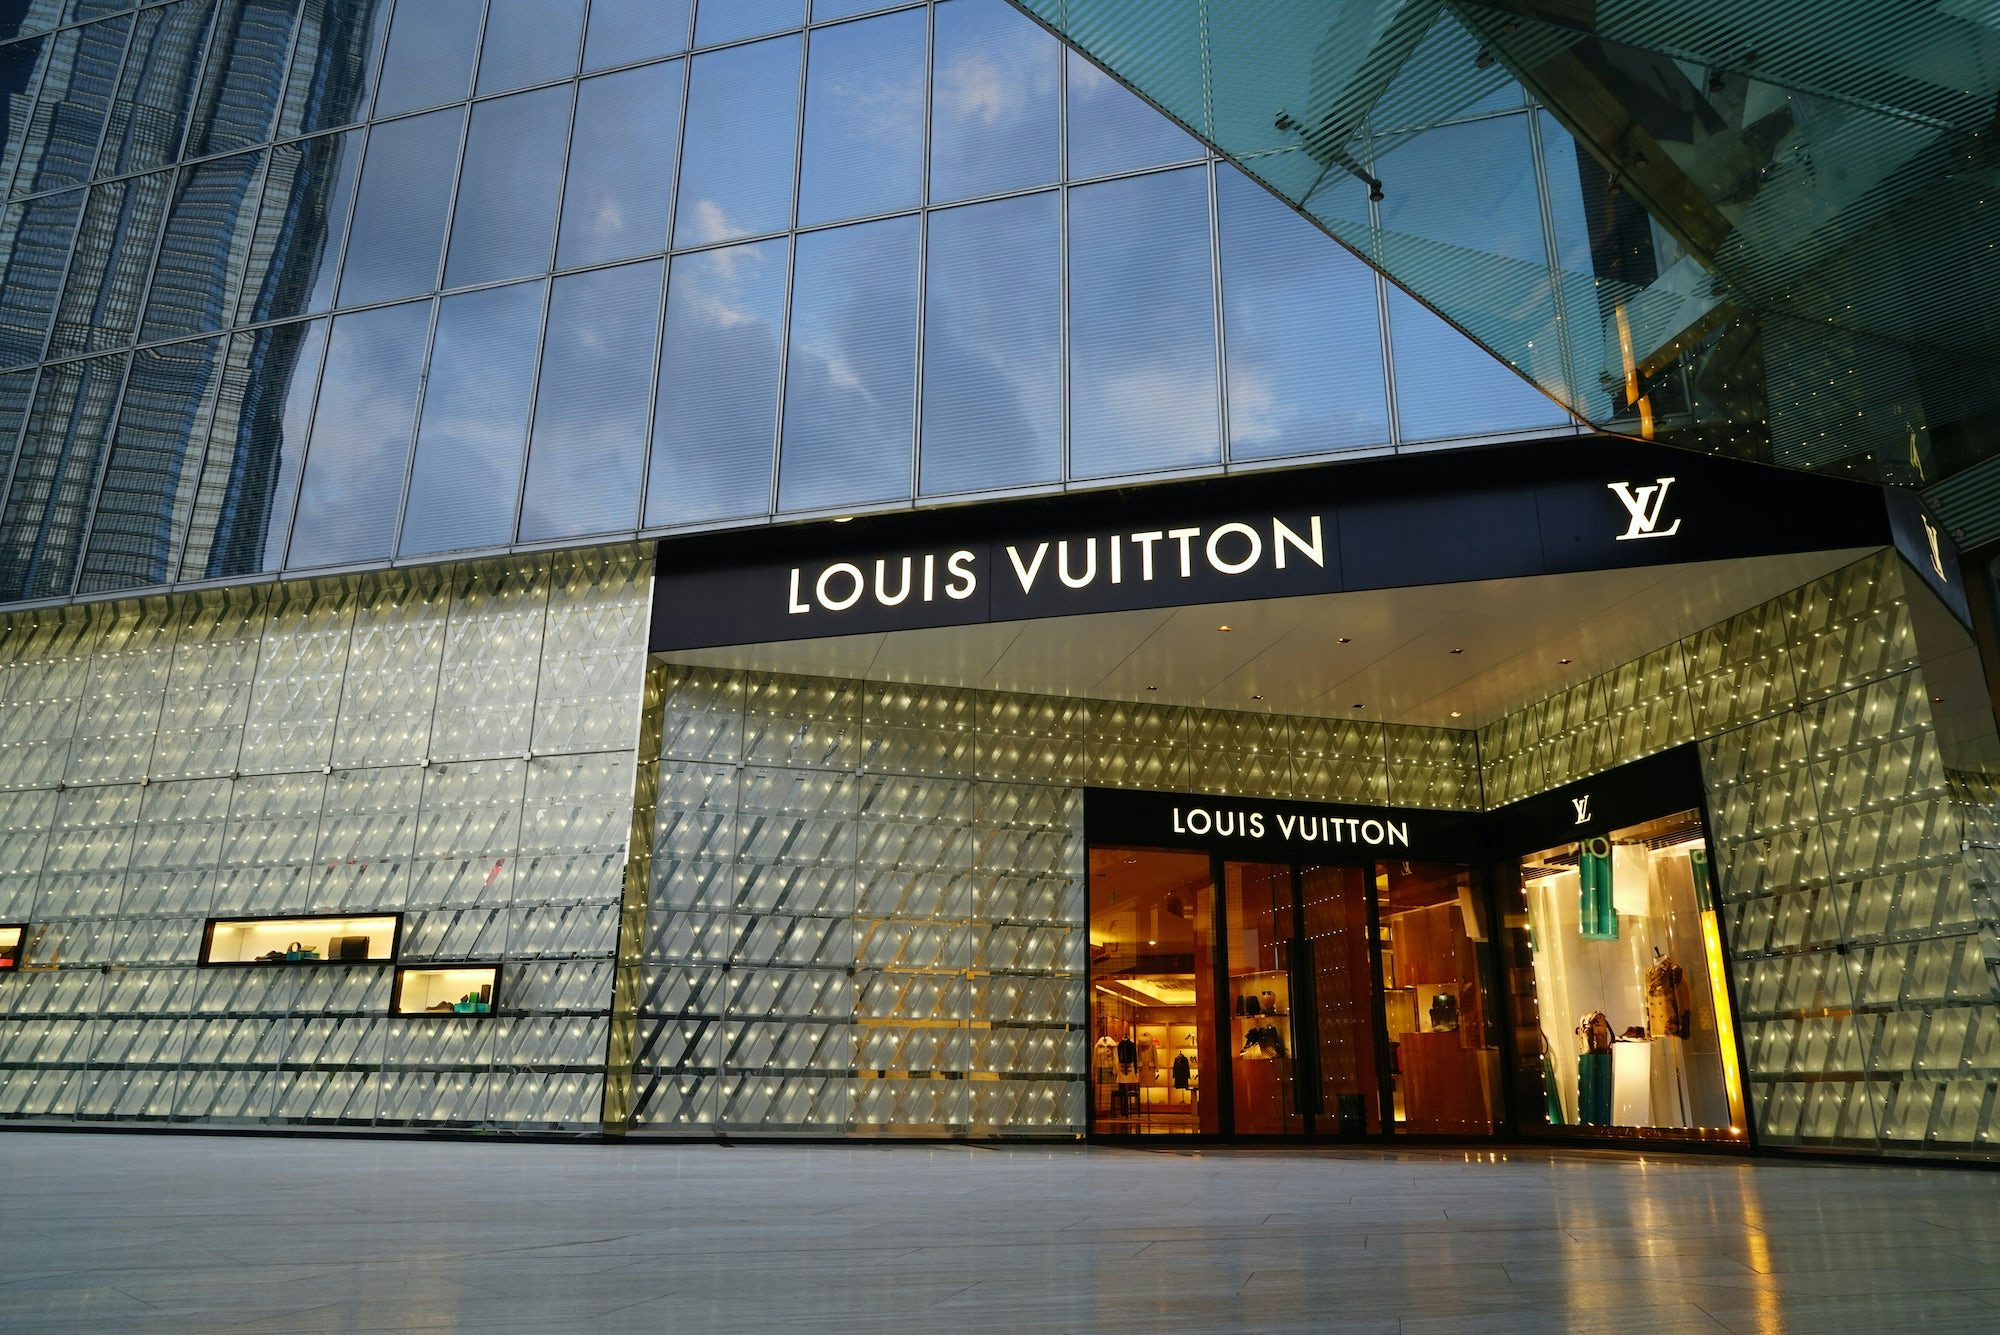 Louis Vuitton store at the IFC Mall in Shanghai. Shutterstock.